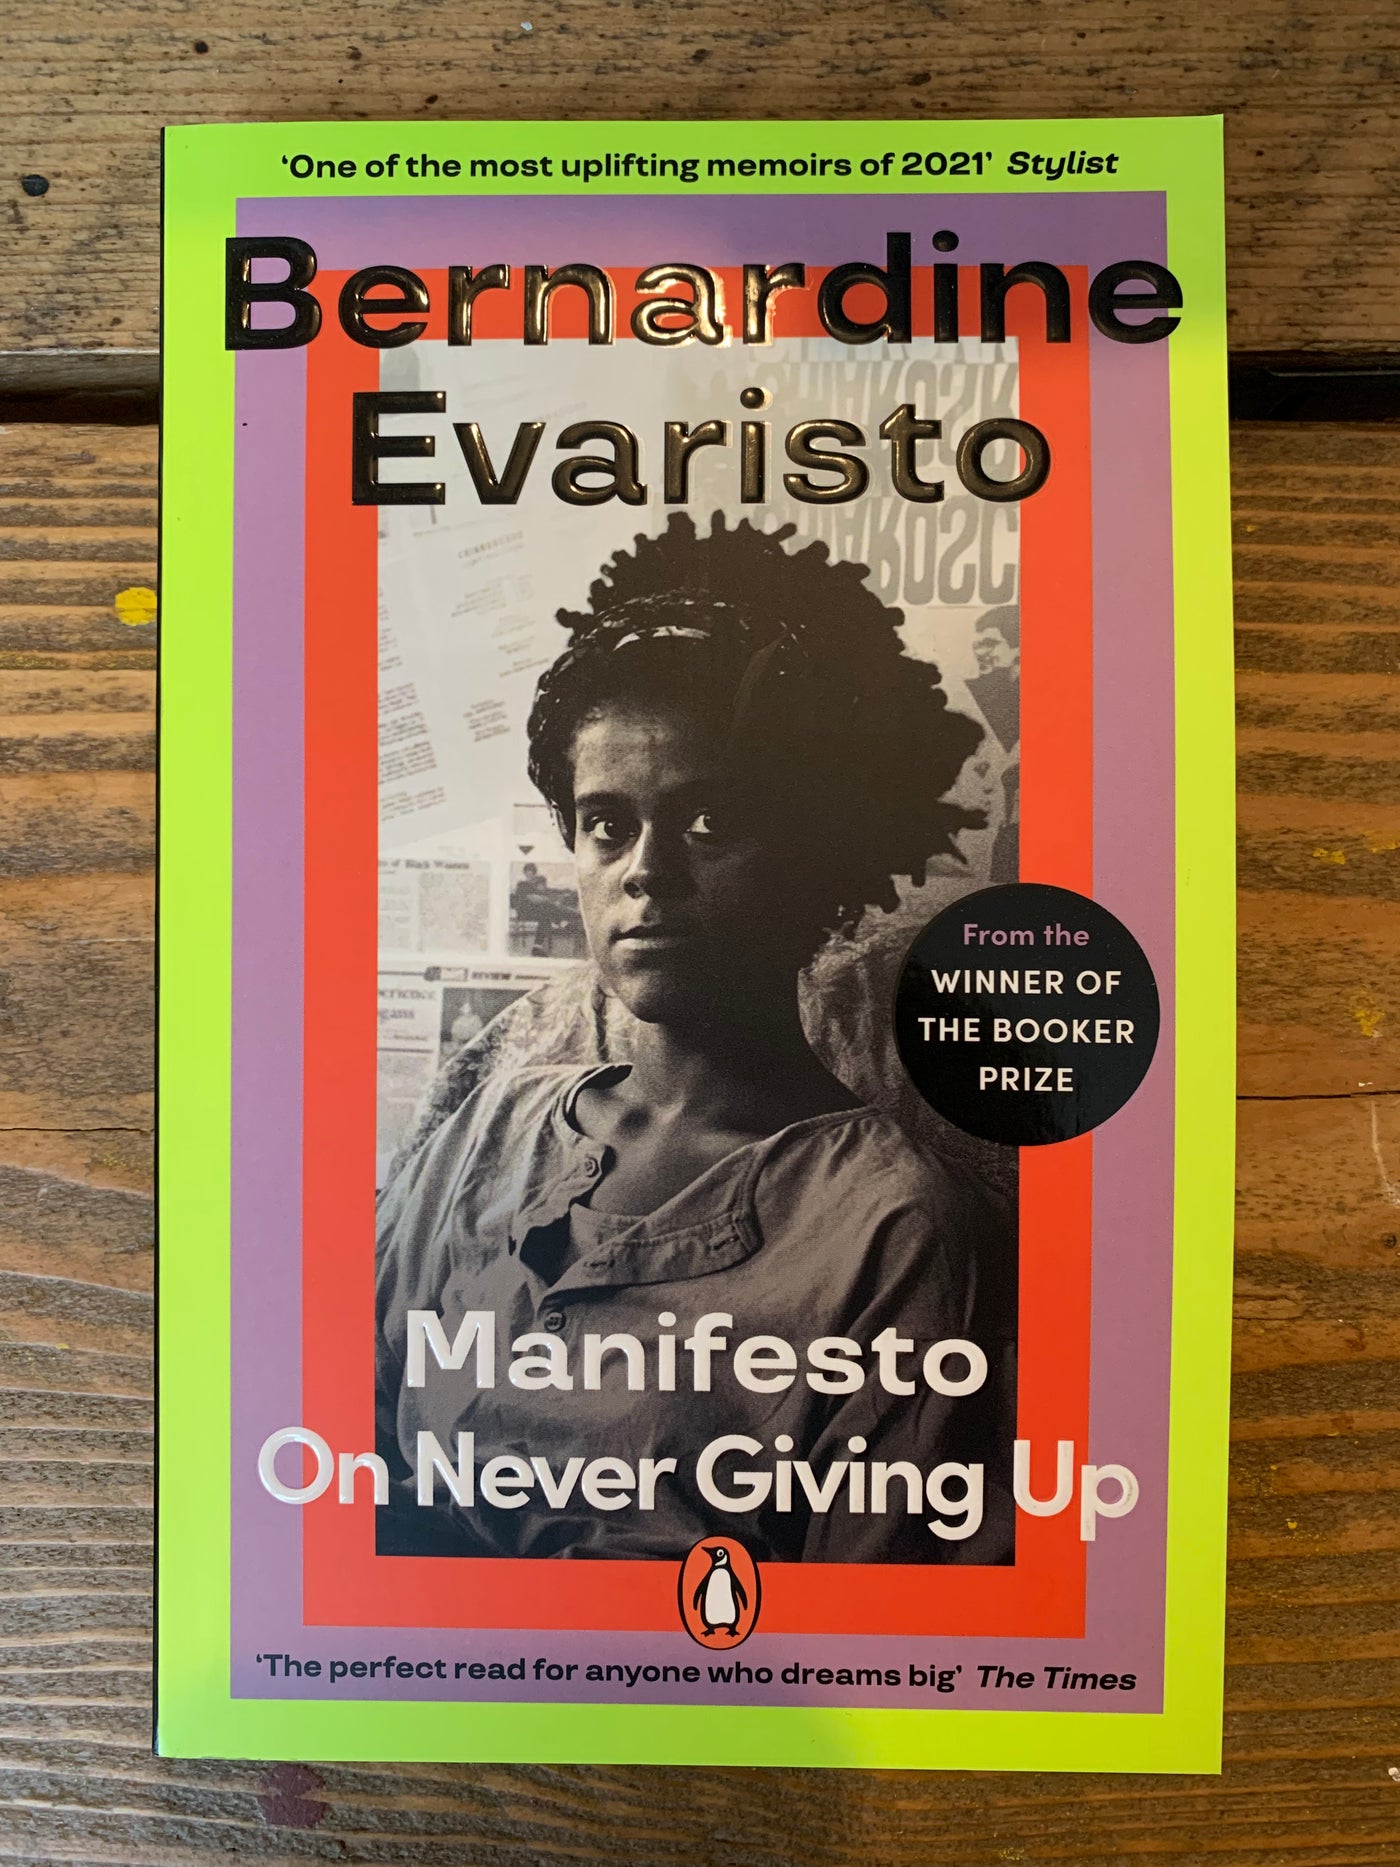 Manifesto: A Rallying Cry to Never Give Up